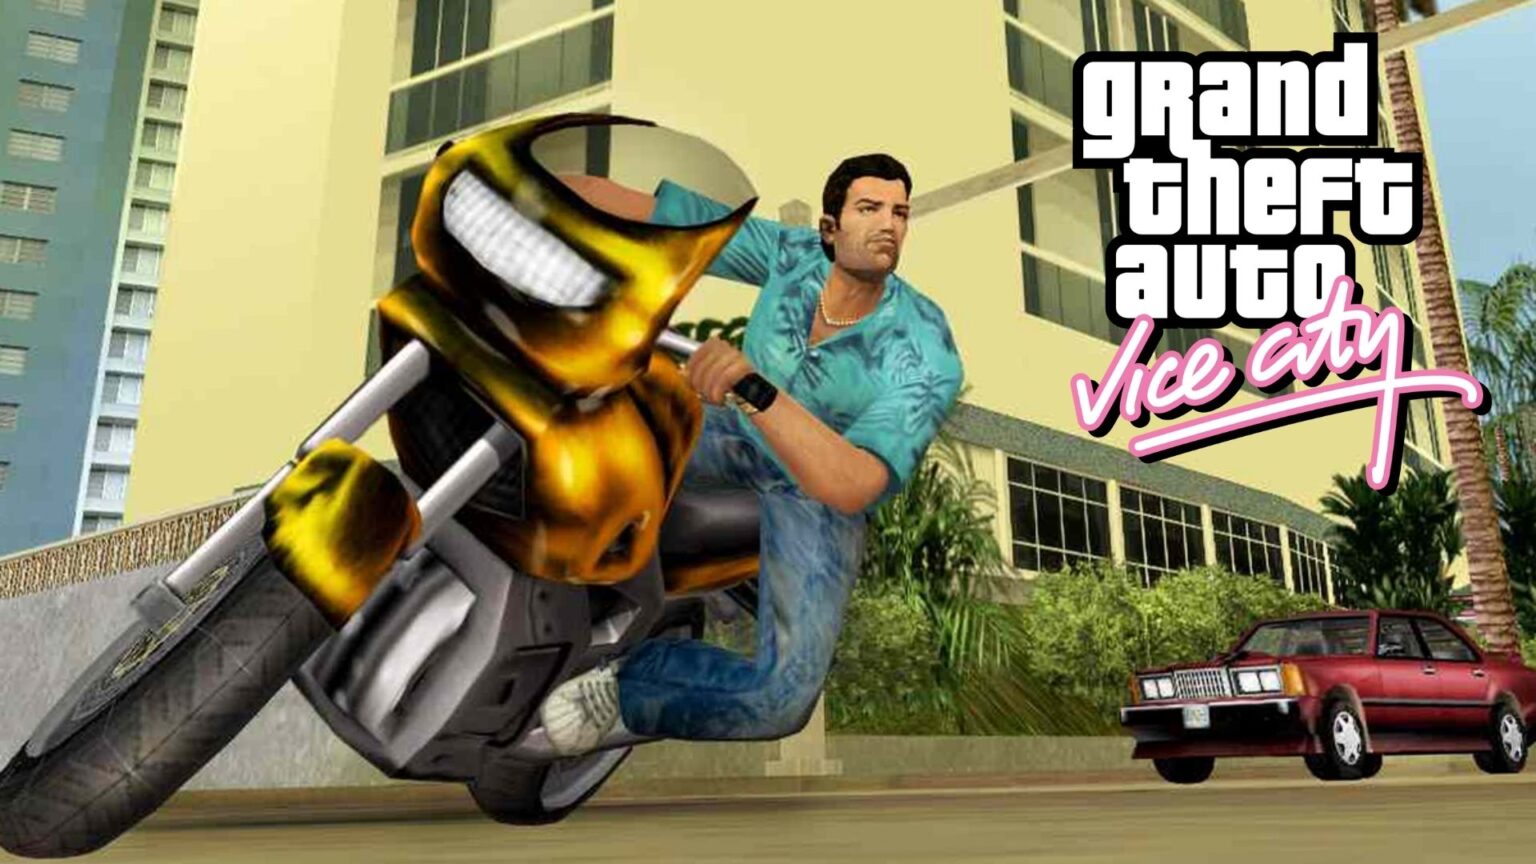 All-GTA-Vice-City-cheat-codes-on-PC-XboxS-GamersRD